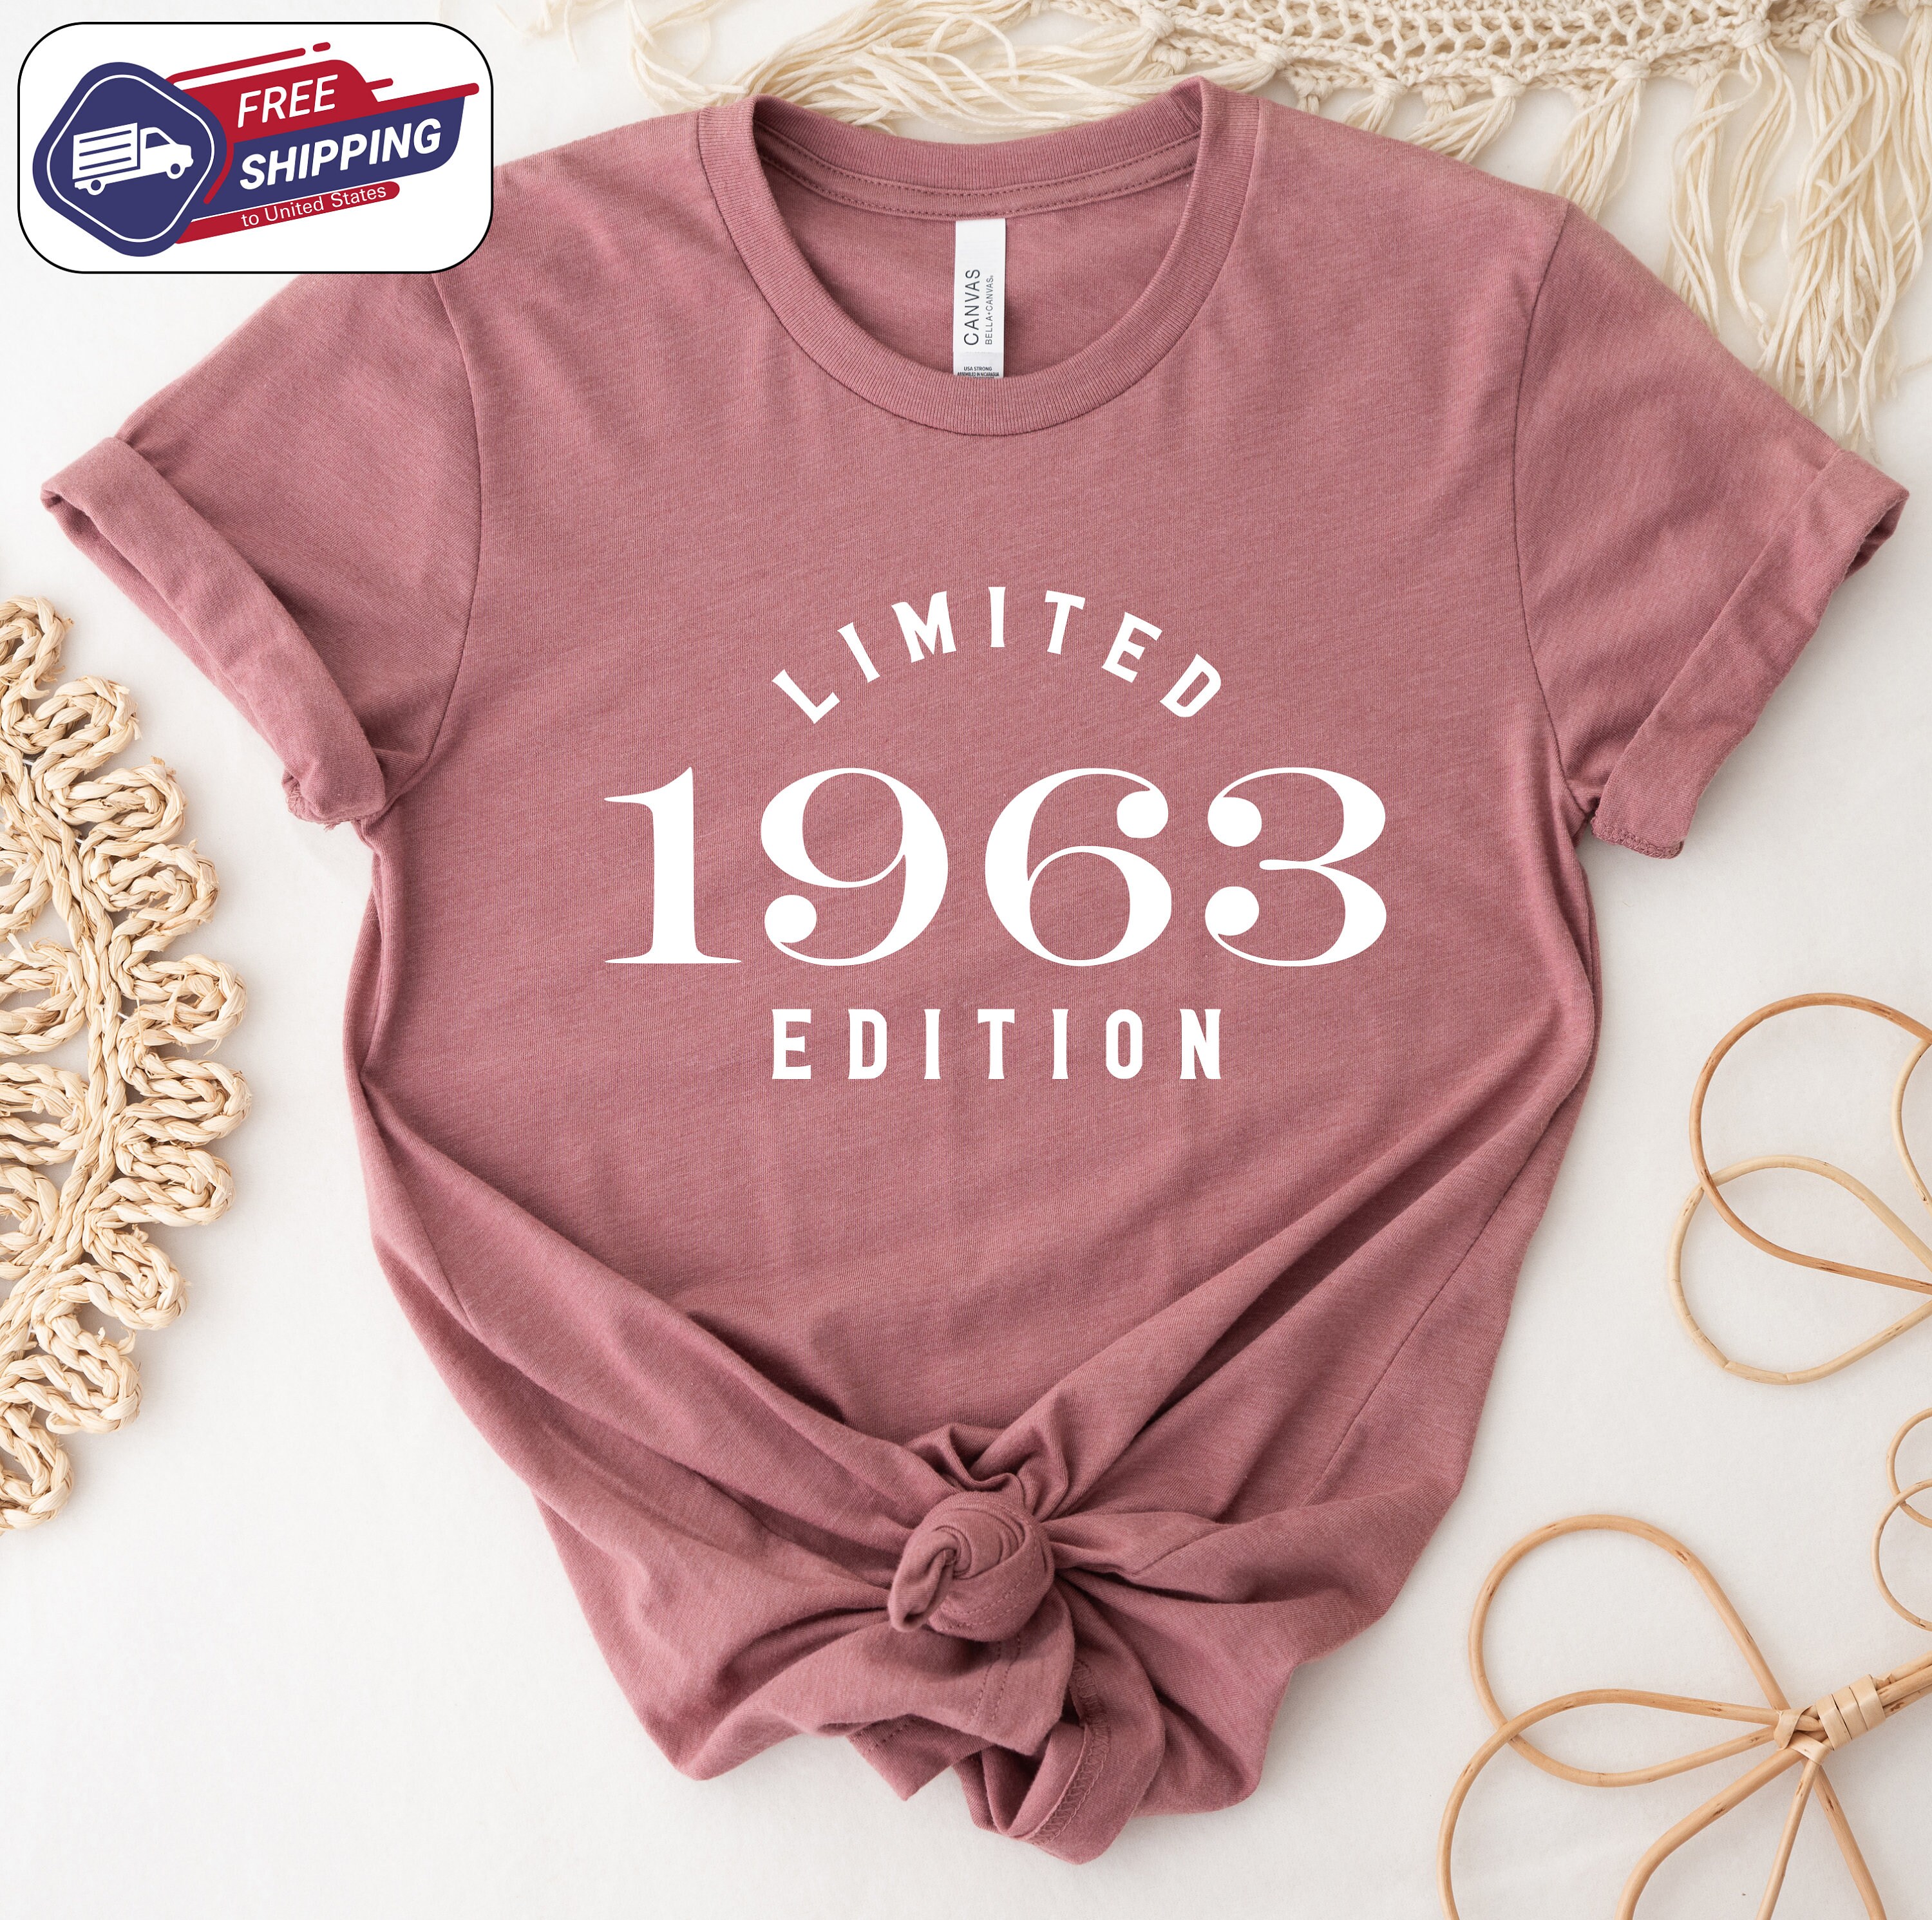 Discover Limited Edition 1963 Shirt, 60th Birthday Shirt, Birthday Party T-Shirts